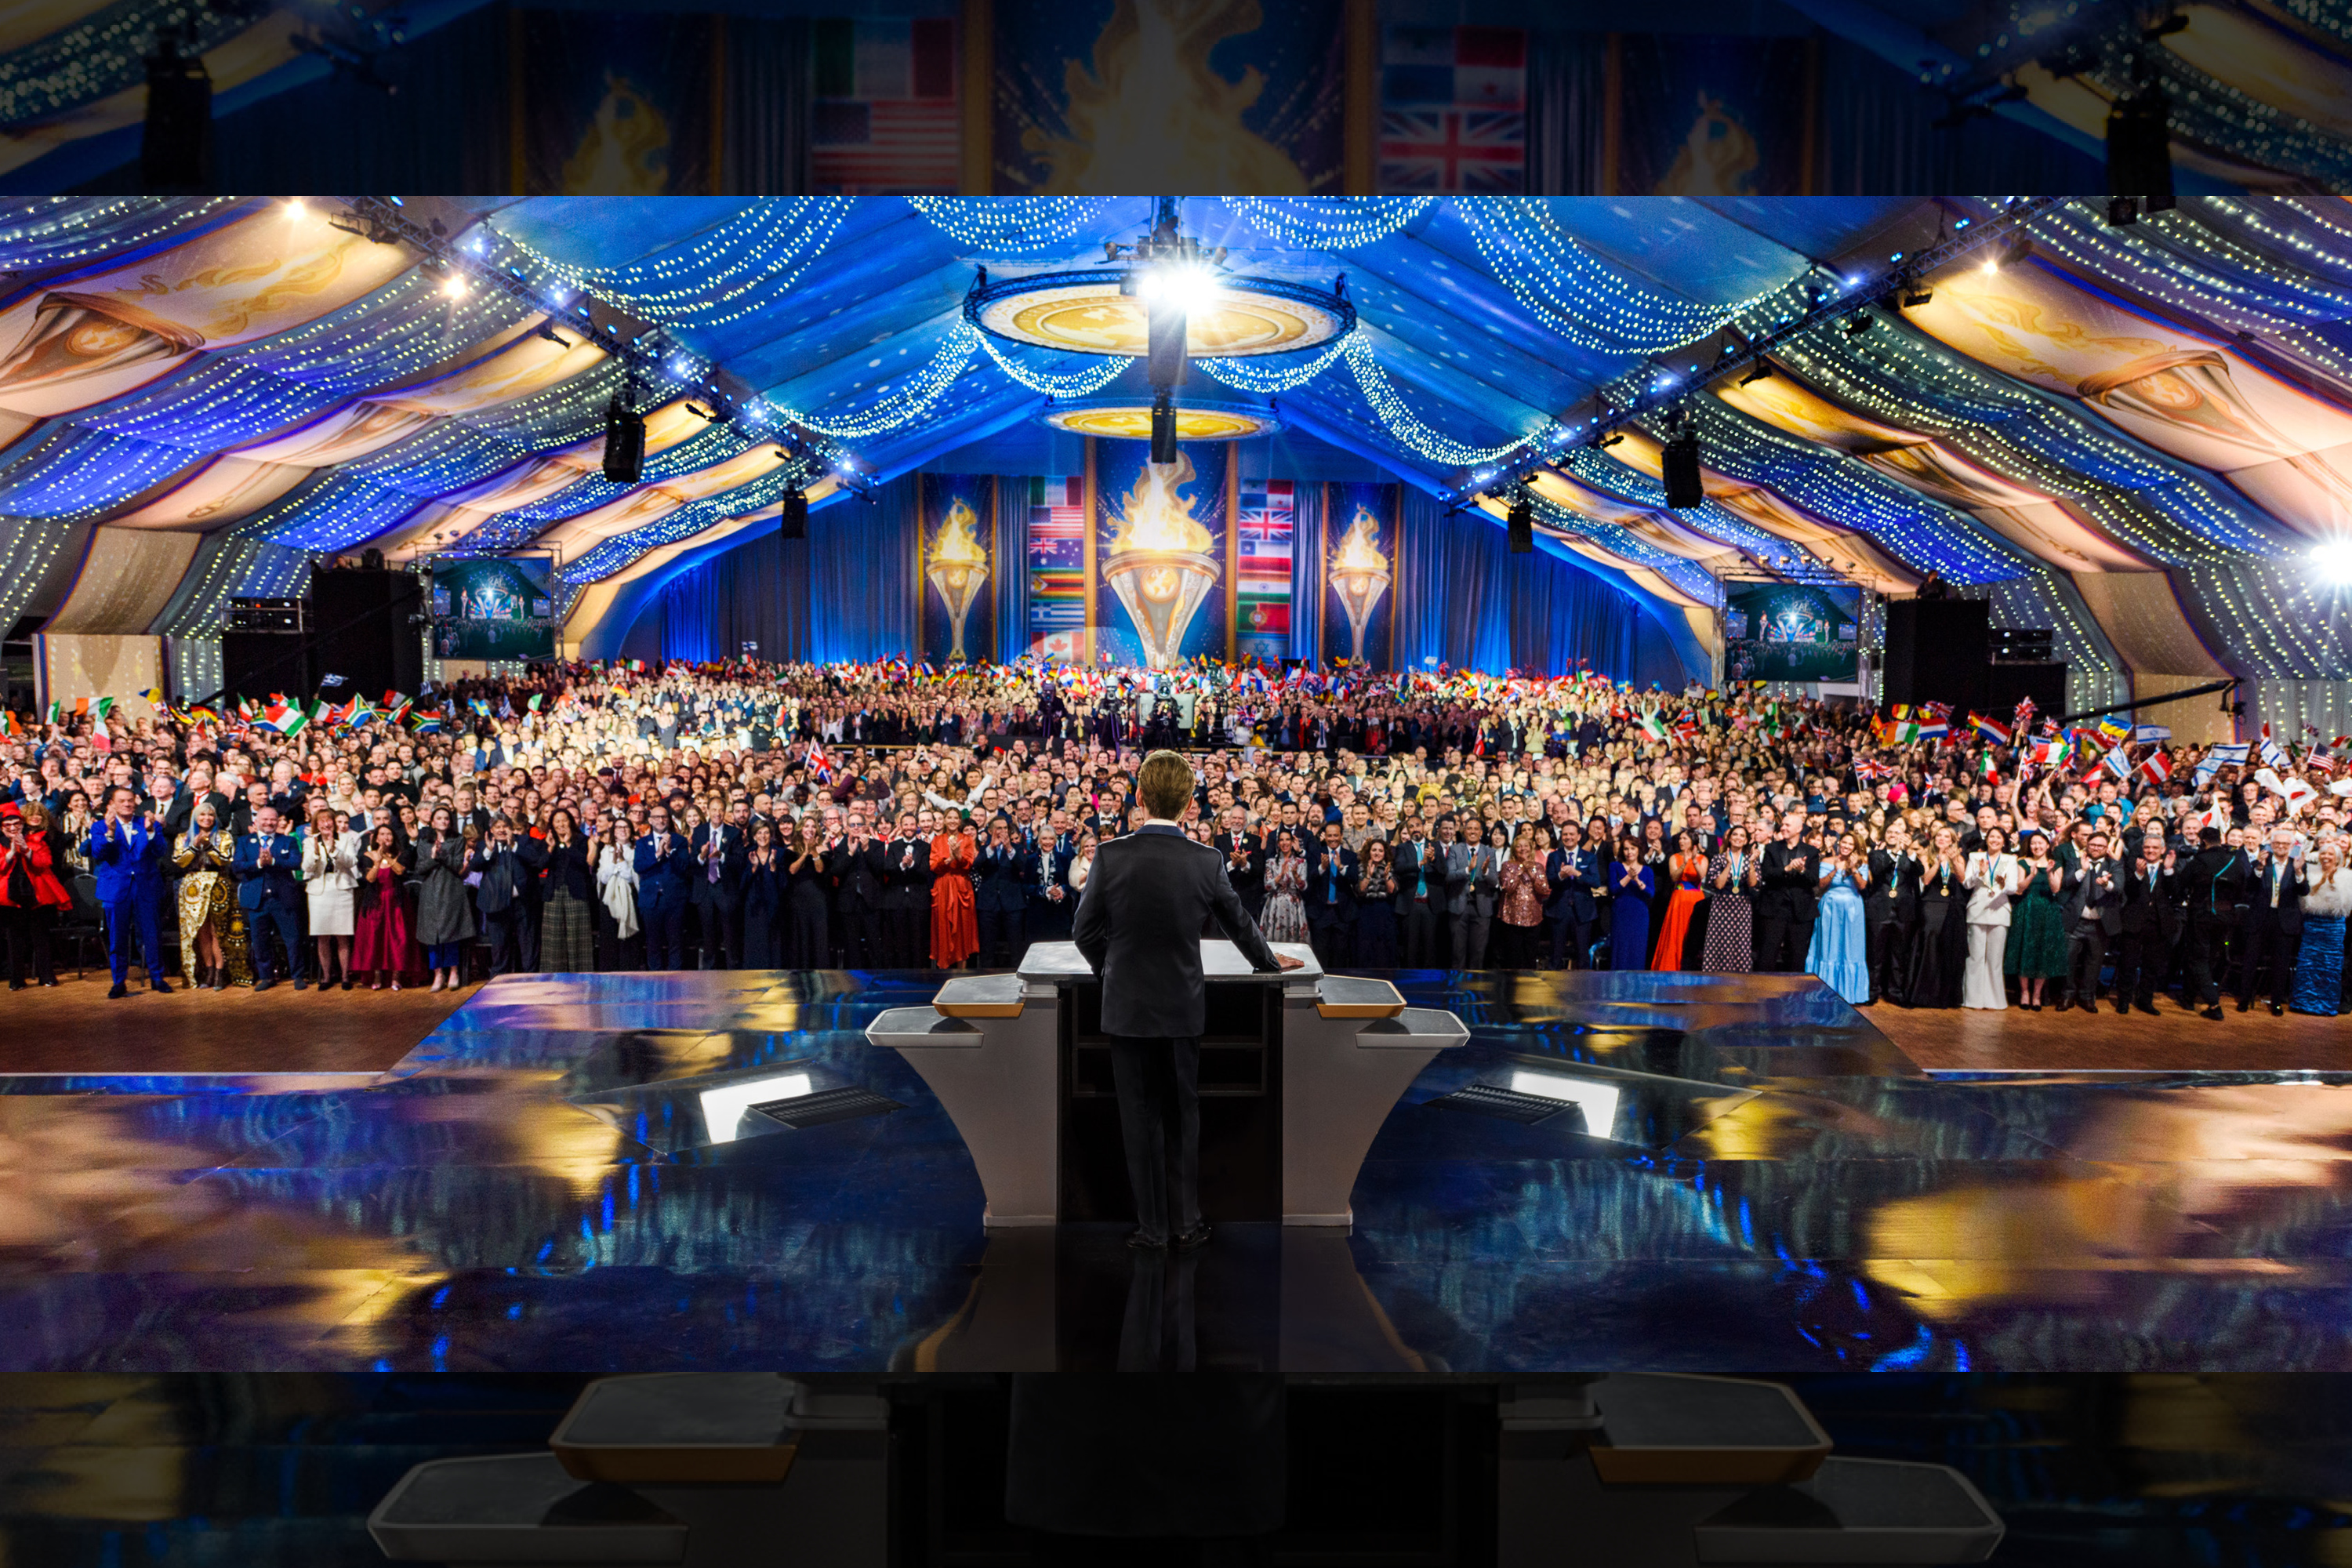 Church of Scientology event